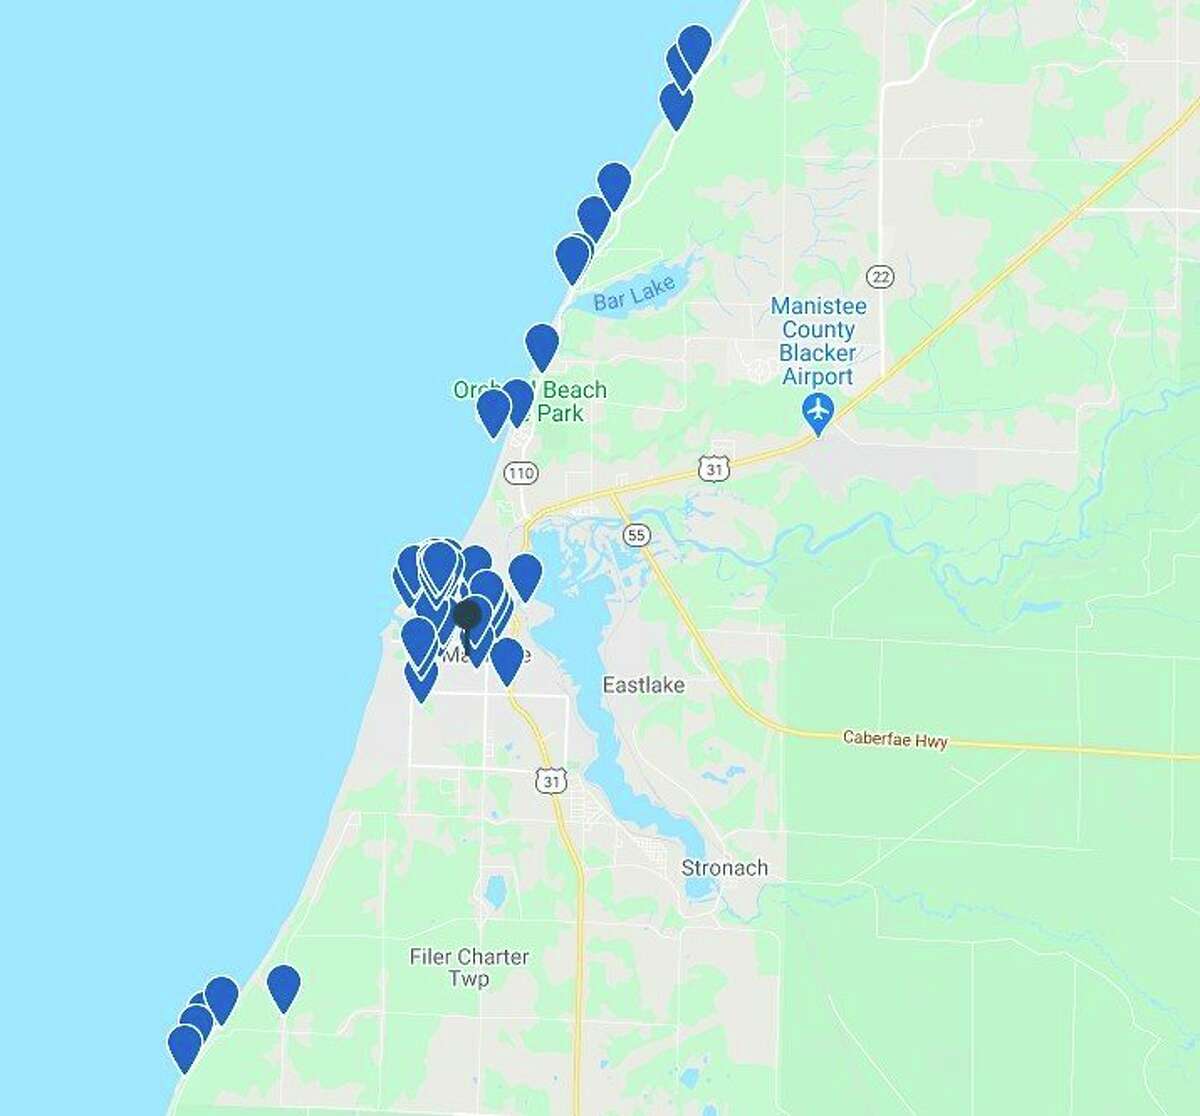 Rental properties available in the Manistee area on the popular website VRBO. (Screenshot from VRBO)